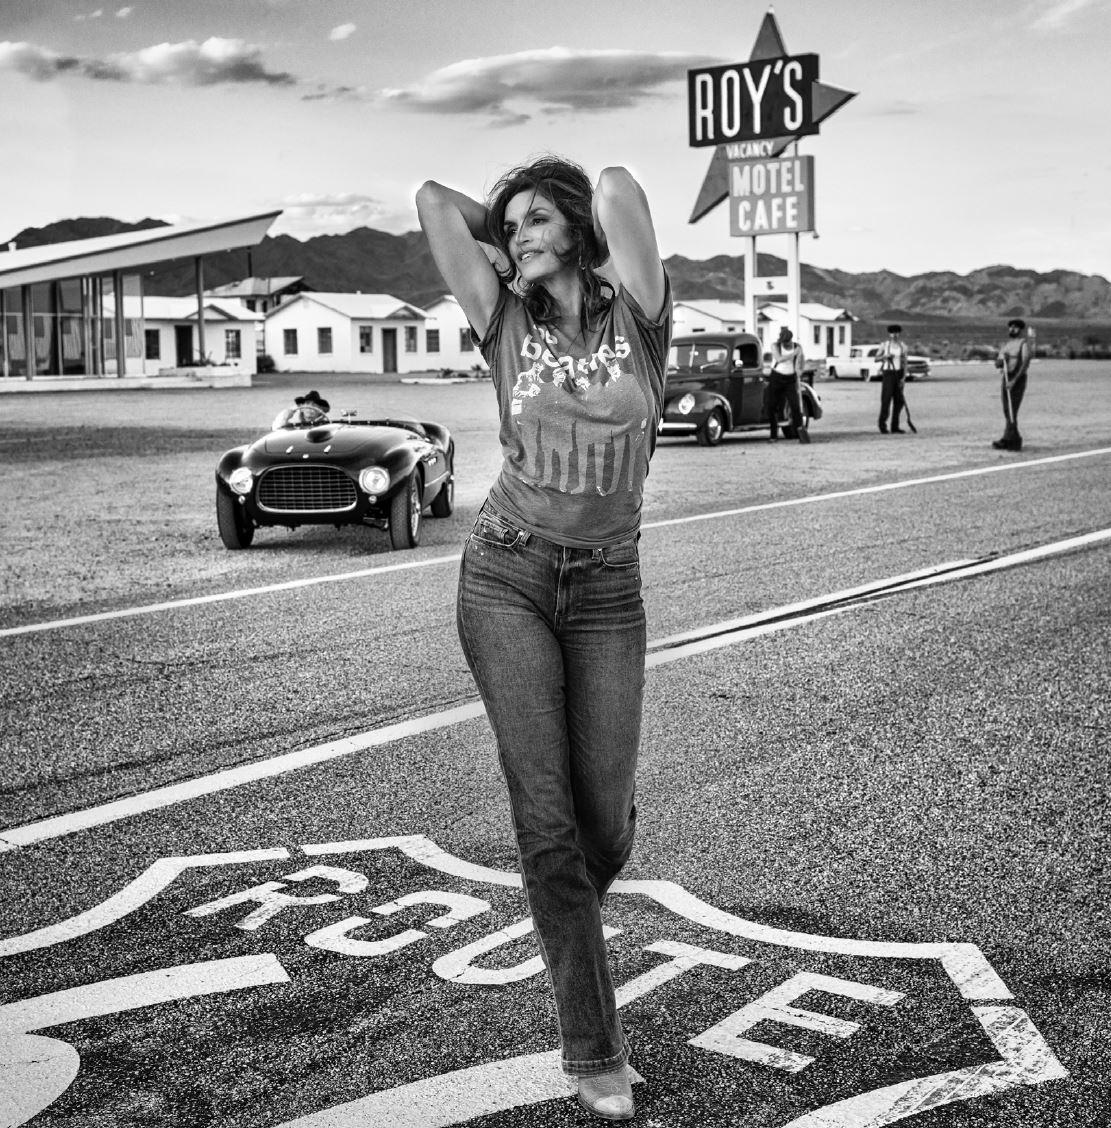 David Yarrow Figurative Photograph - Roy's - Supermodel Cindy Crawford walking in front of 1950s motel on route 66